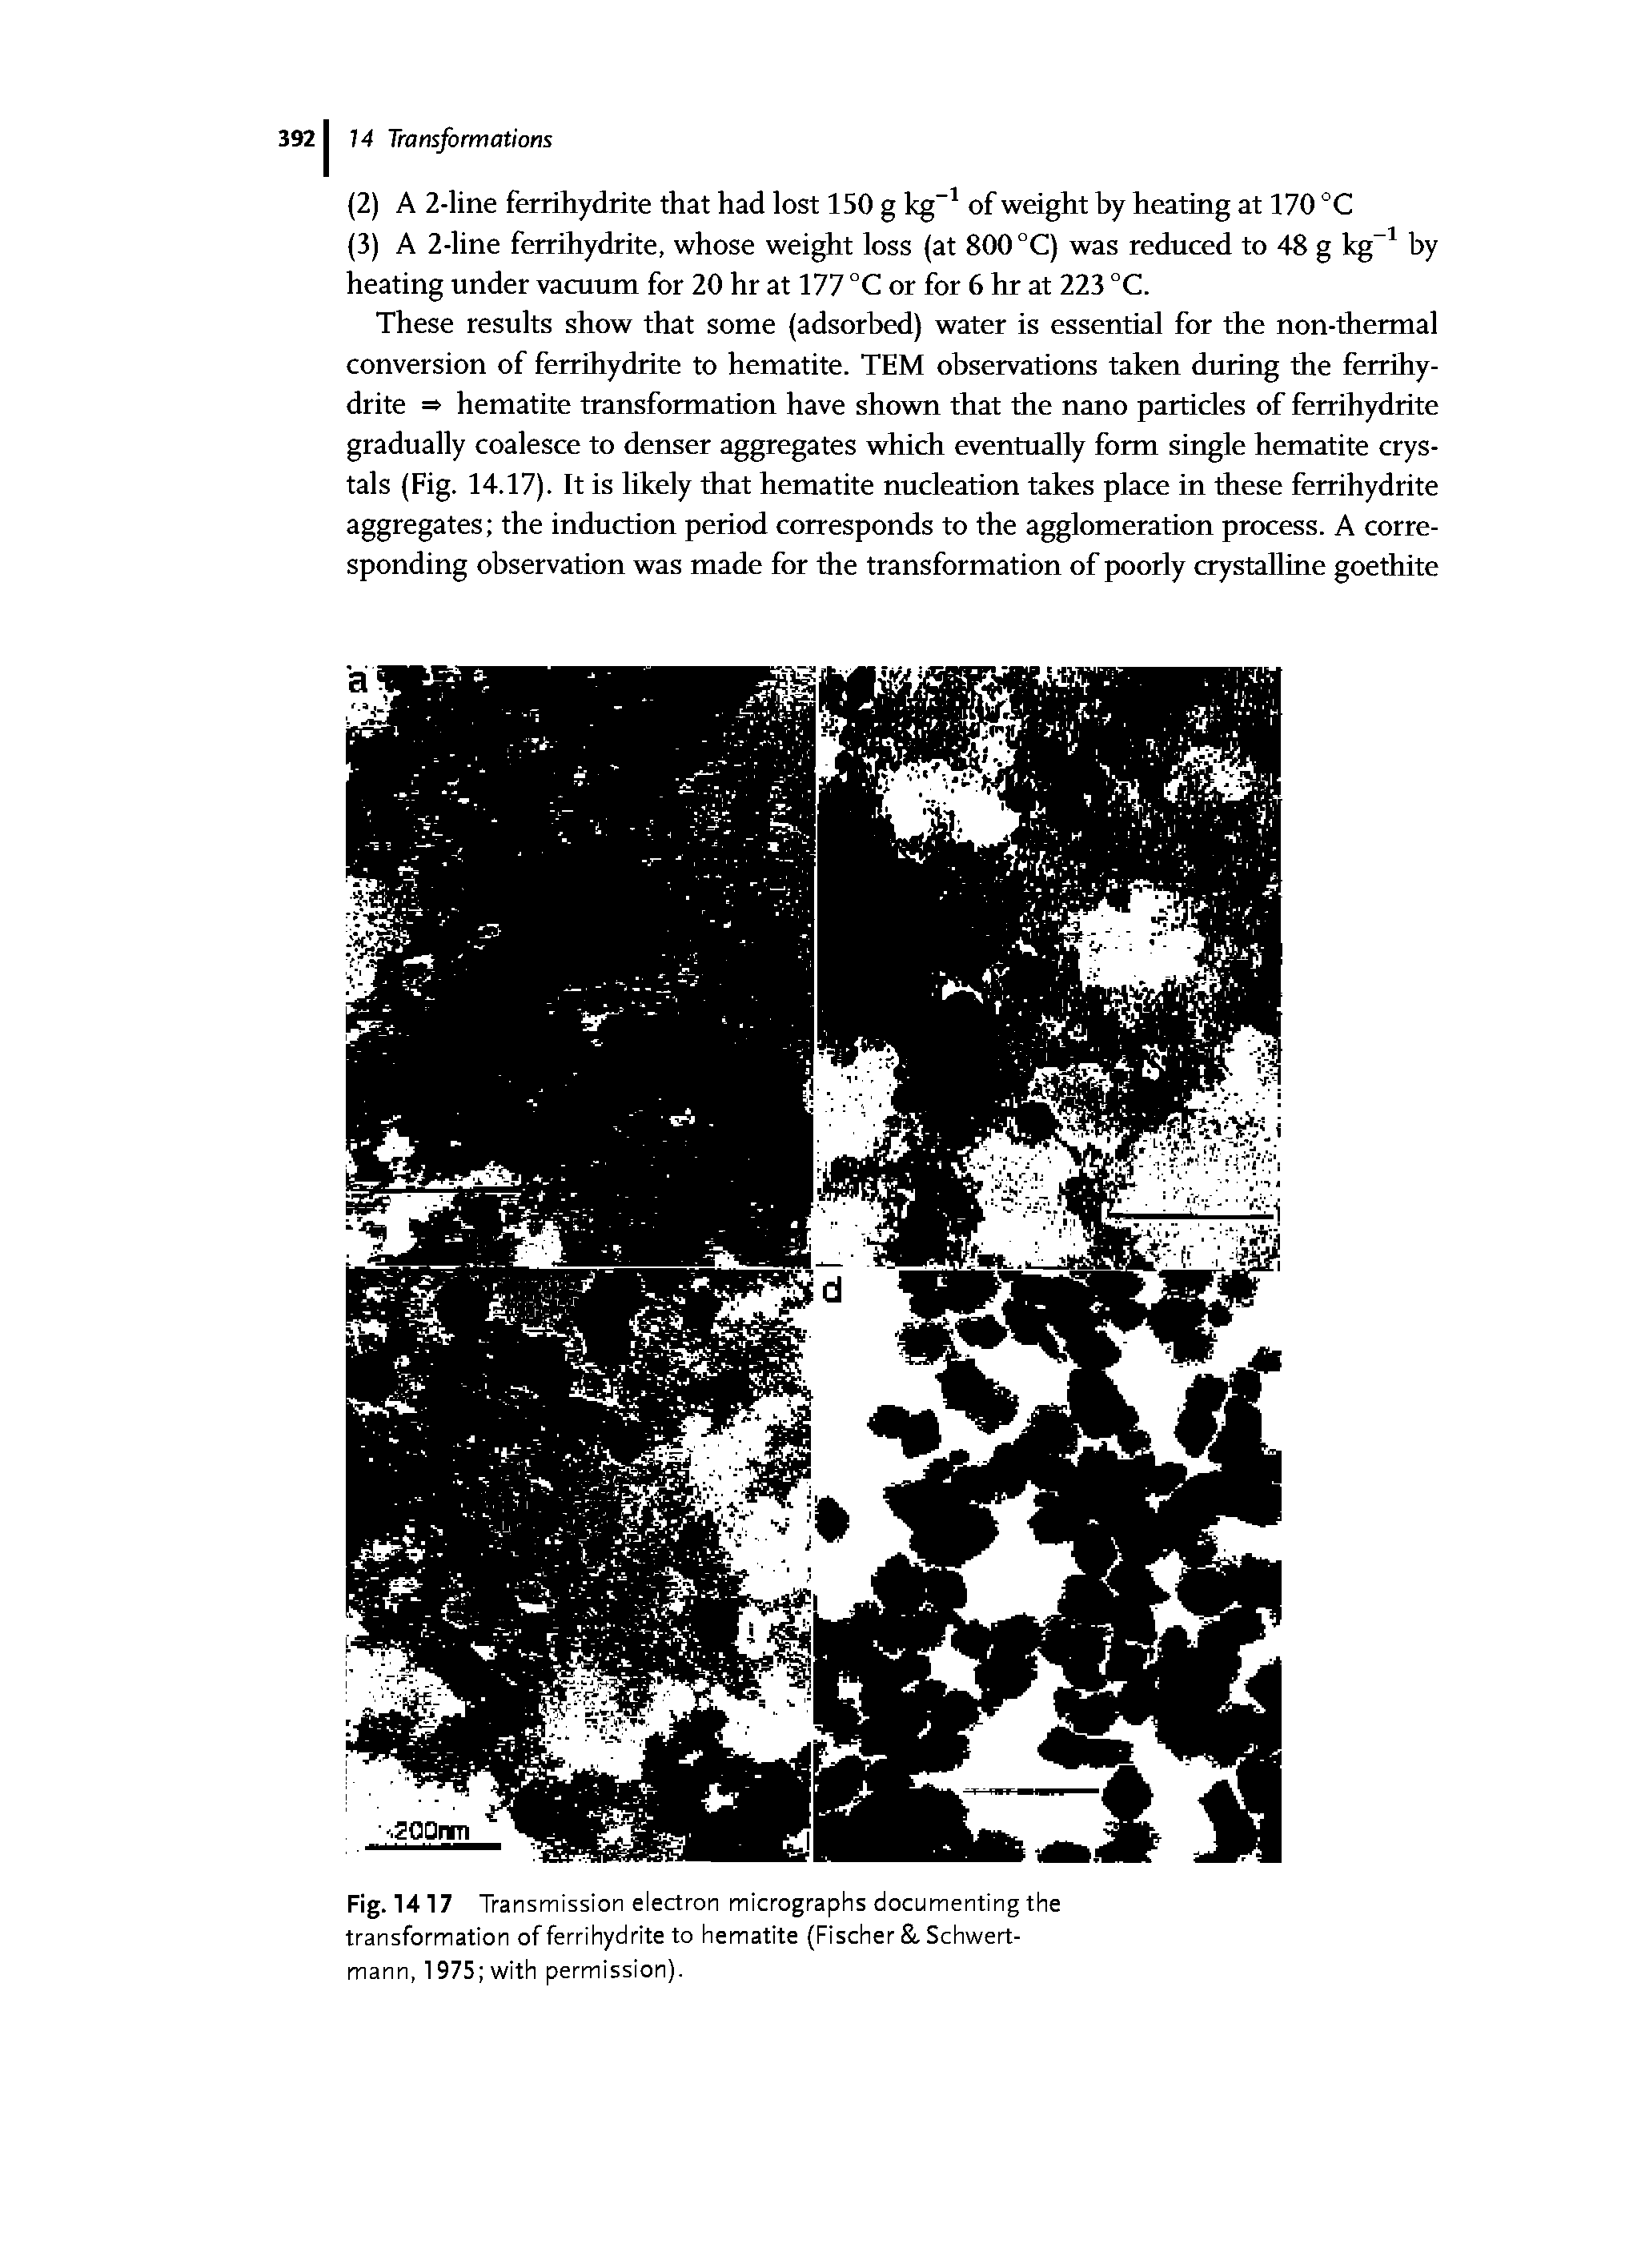 Fig. 1417 Transmission electron micrographs documenting the transformation of ferrihydrite to hematite (Fischer. Schwert-mann, 1975 with permission).